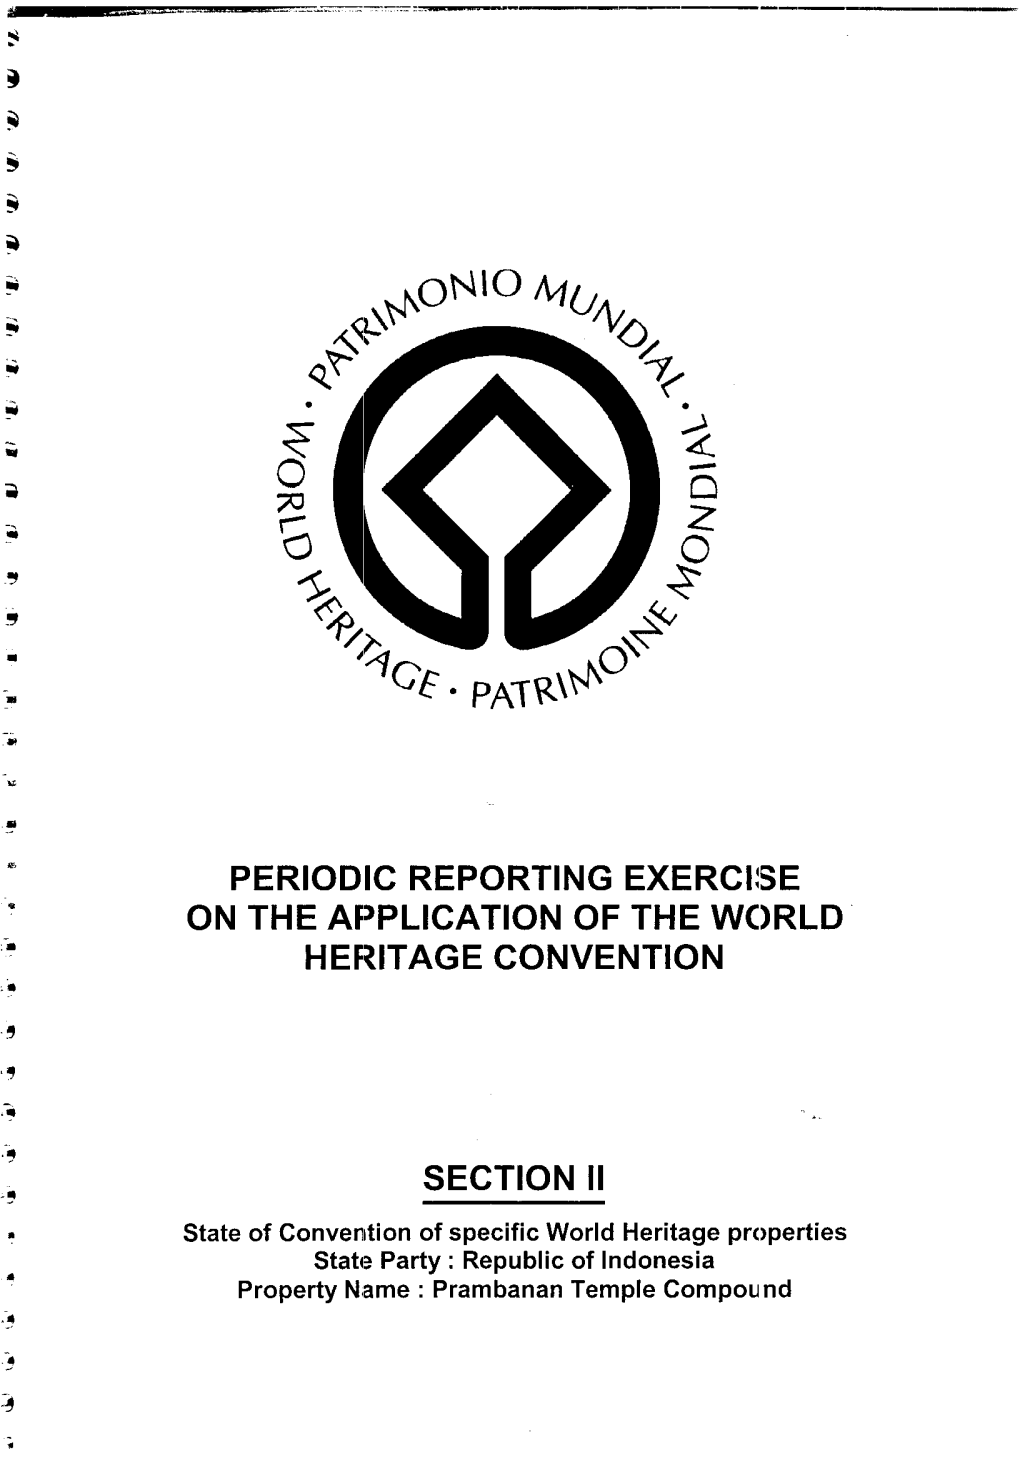 Periodic Reporting Cycle 1, Section II